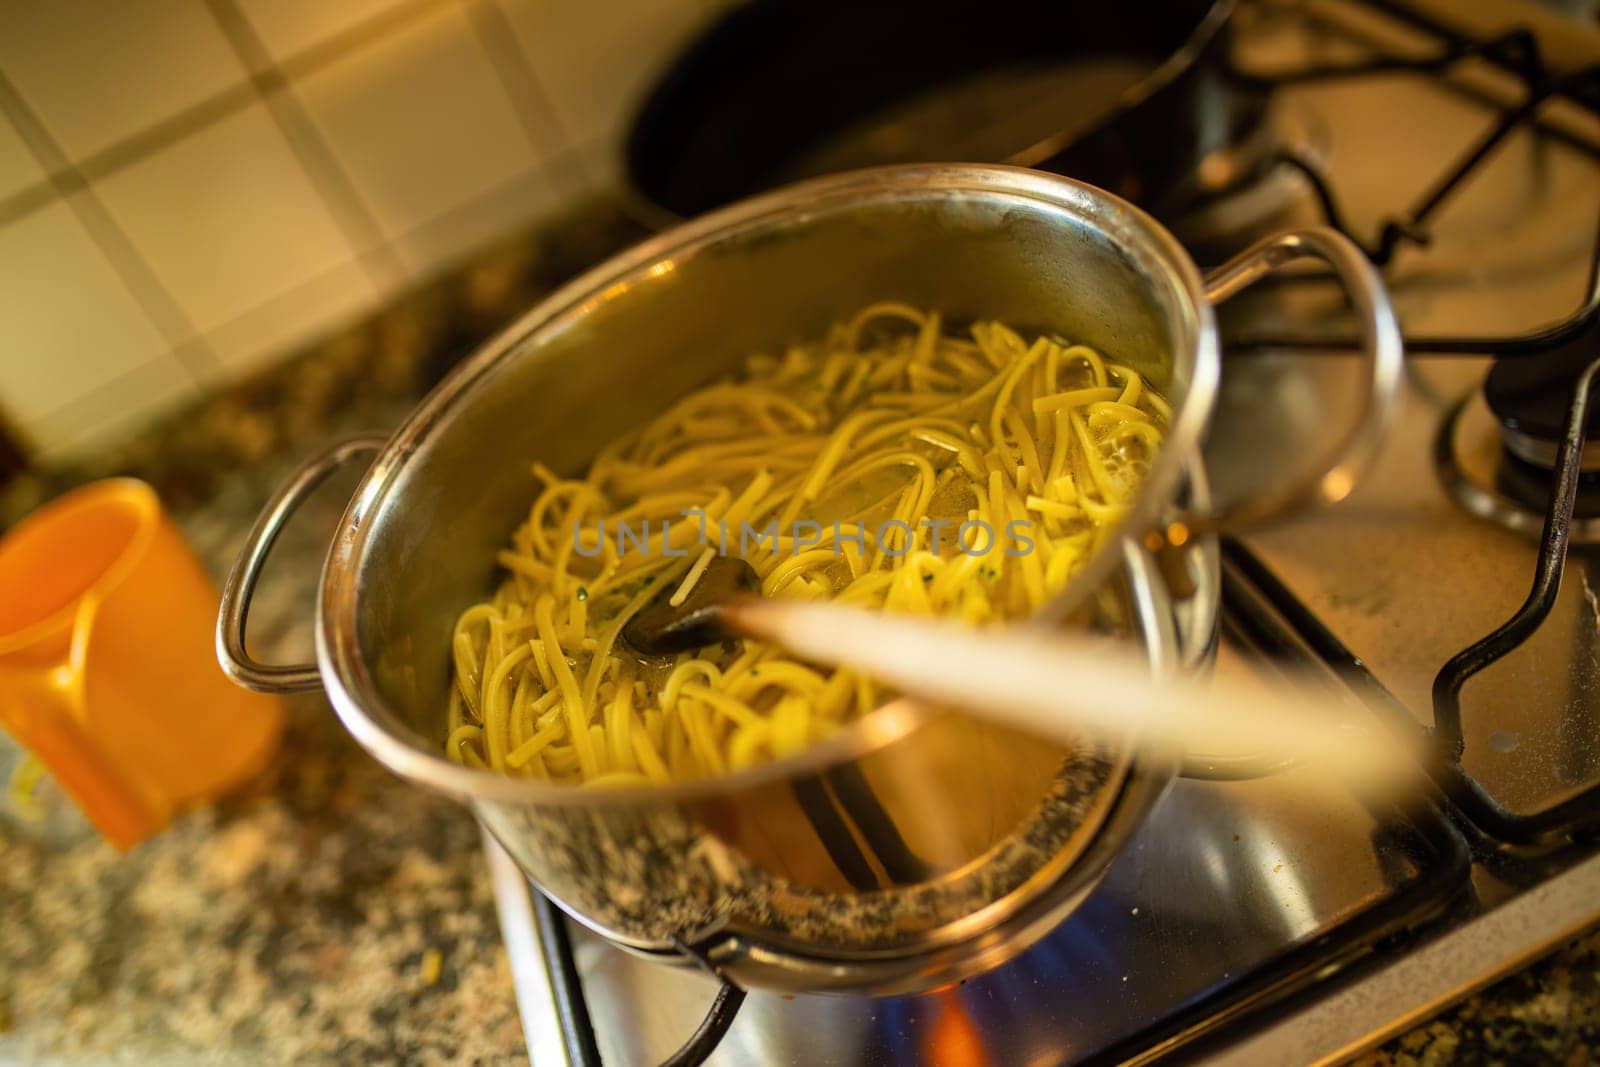 Steam rises from a pot of boiling pasta on the stove, capturing the simple yet essential process of pasta preparation.